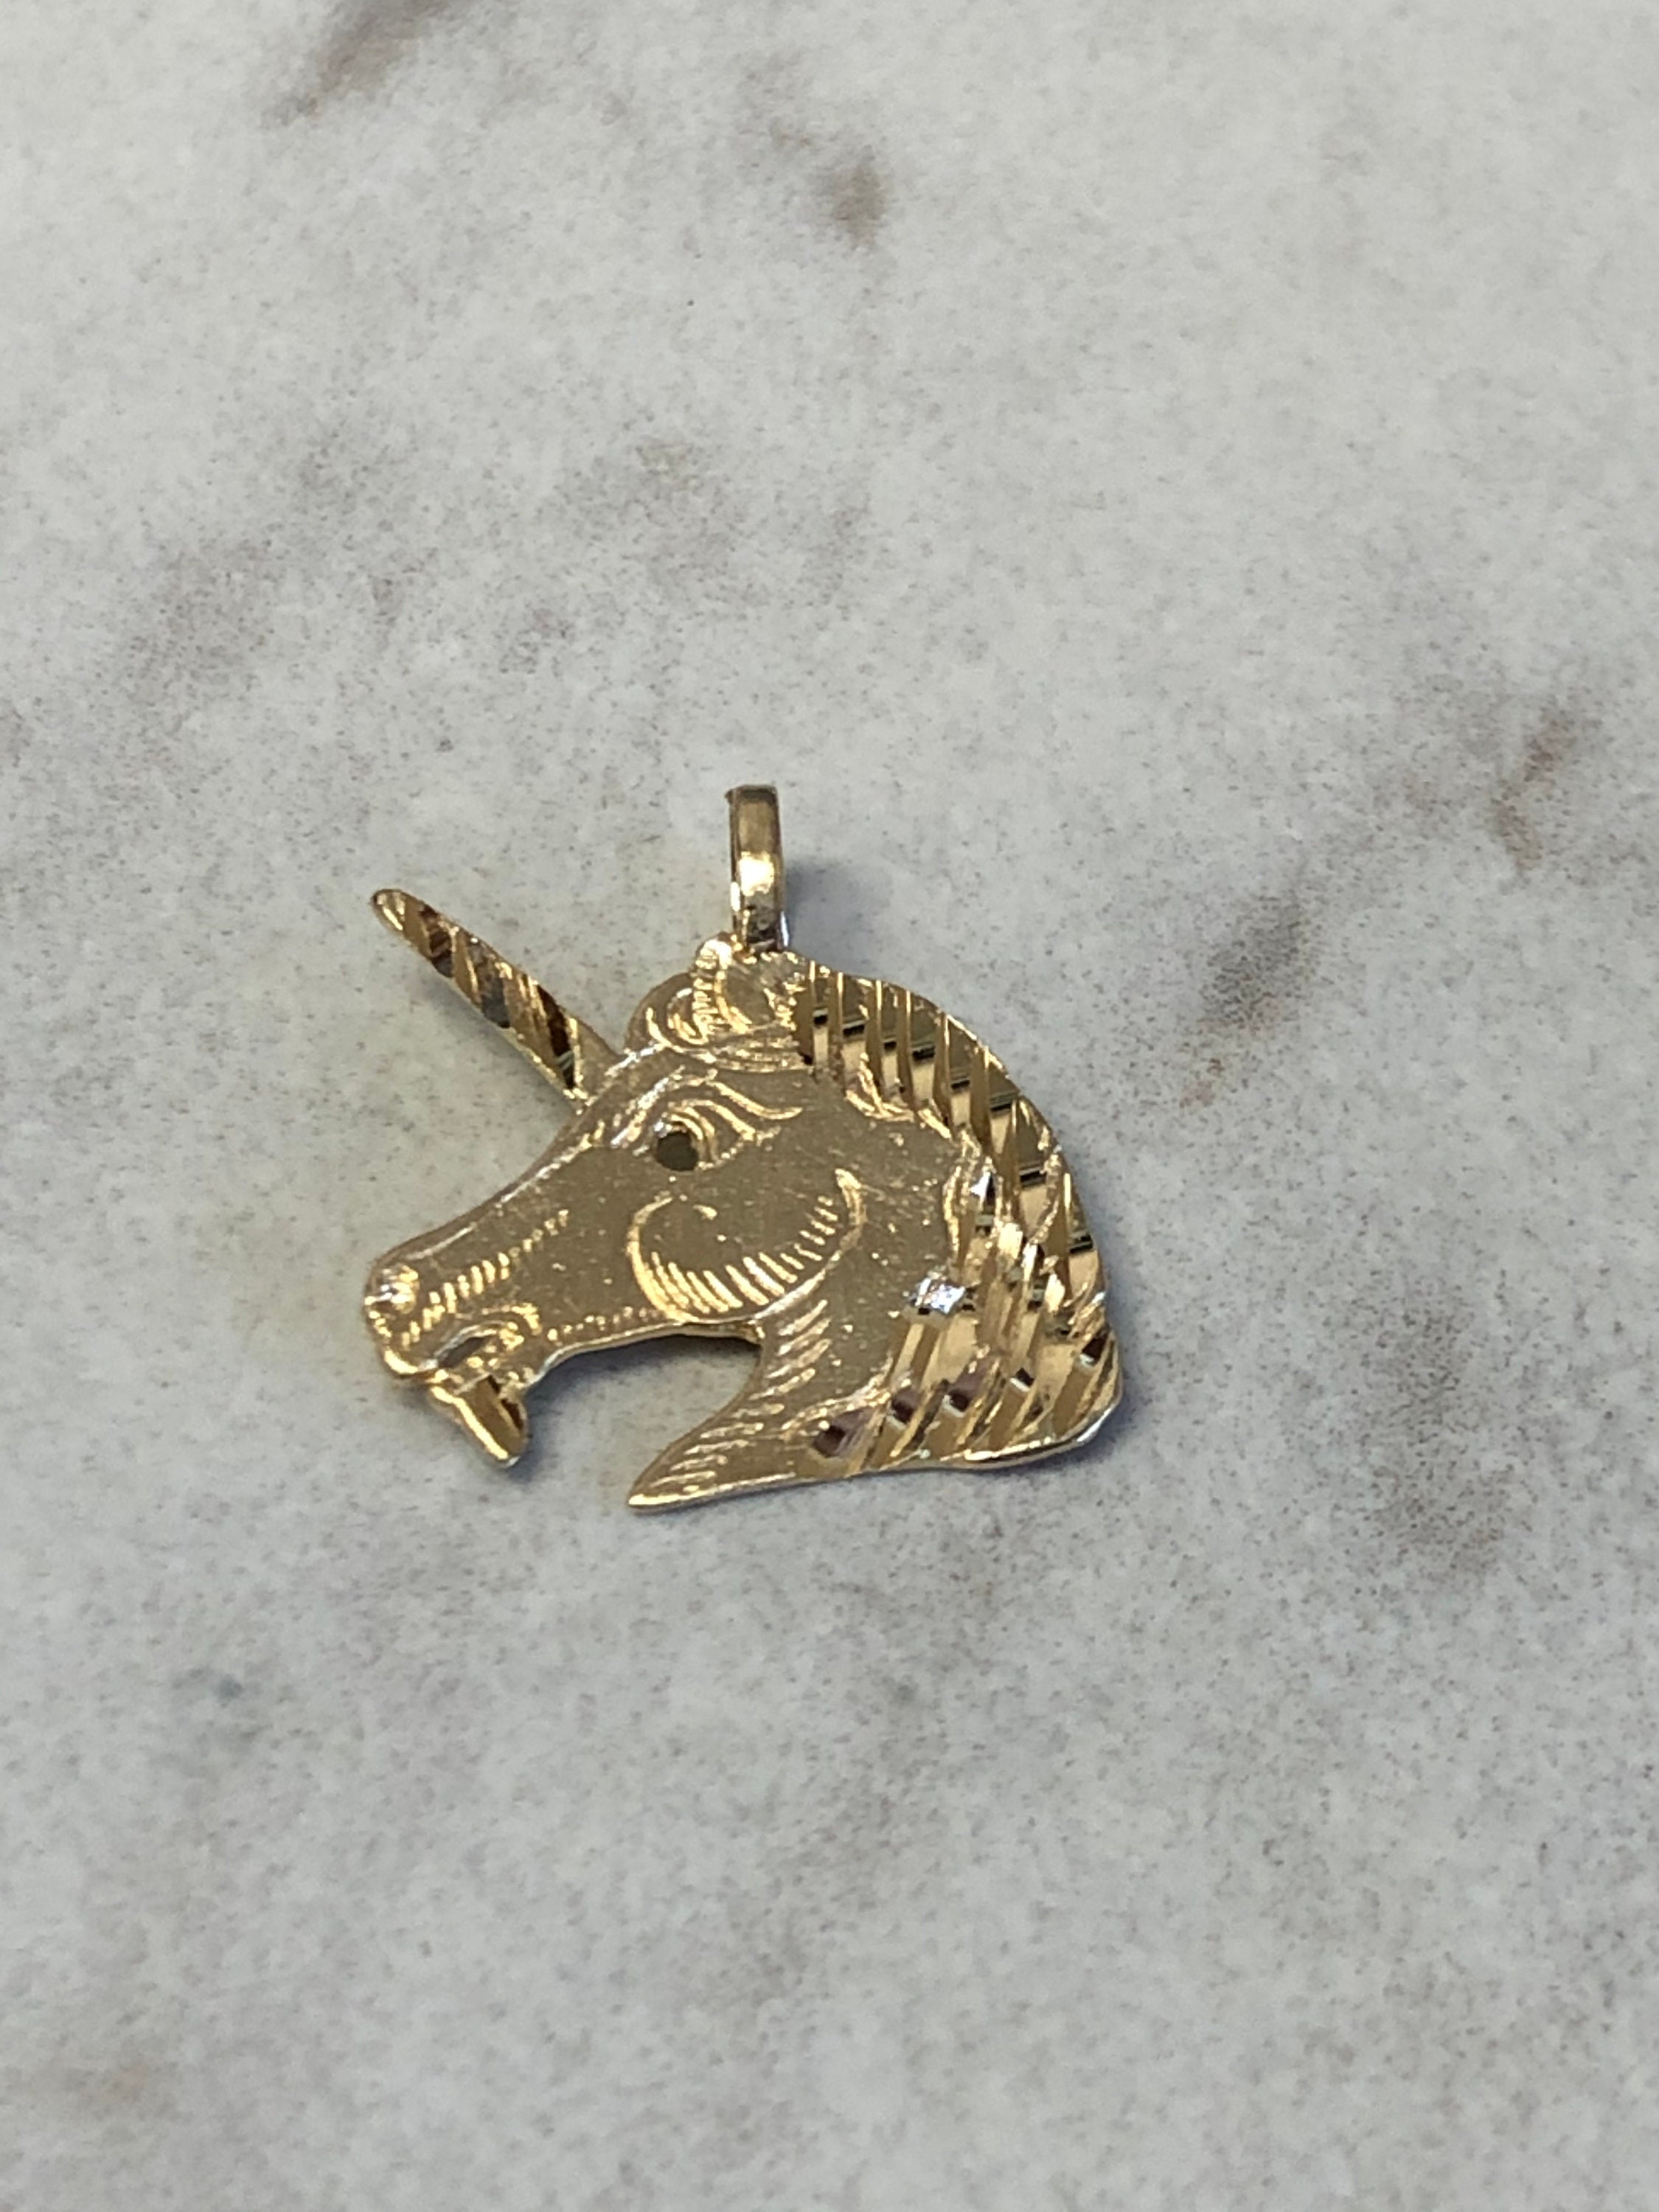 Unicorn Necklace 1/15 ct tw Diamonds Sterling Silver 14K Plated